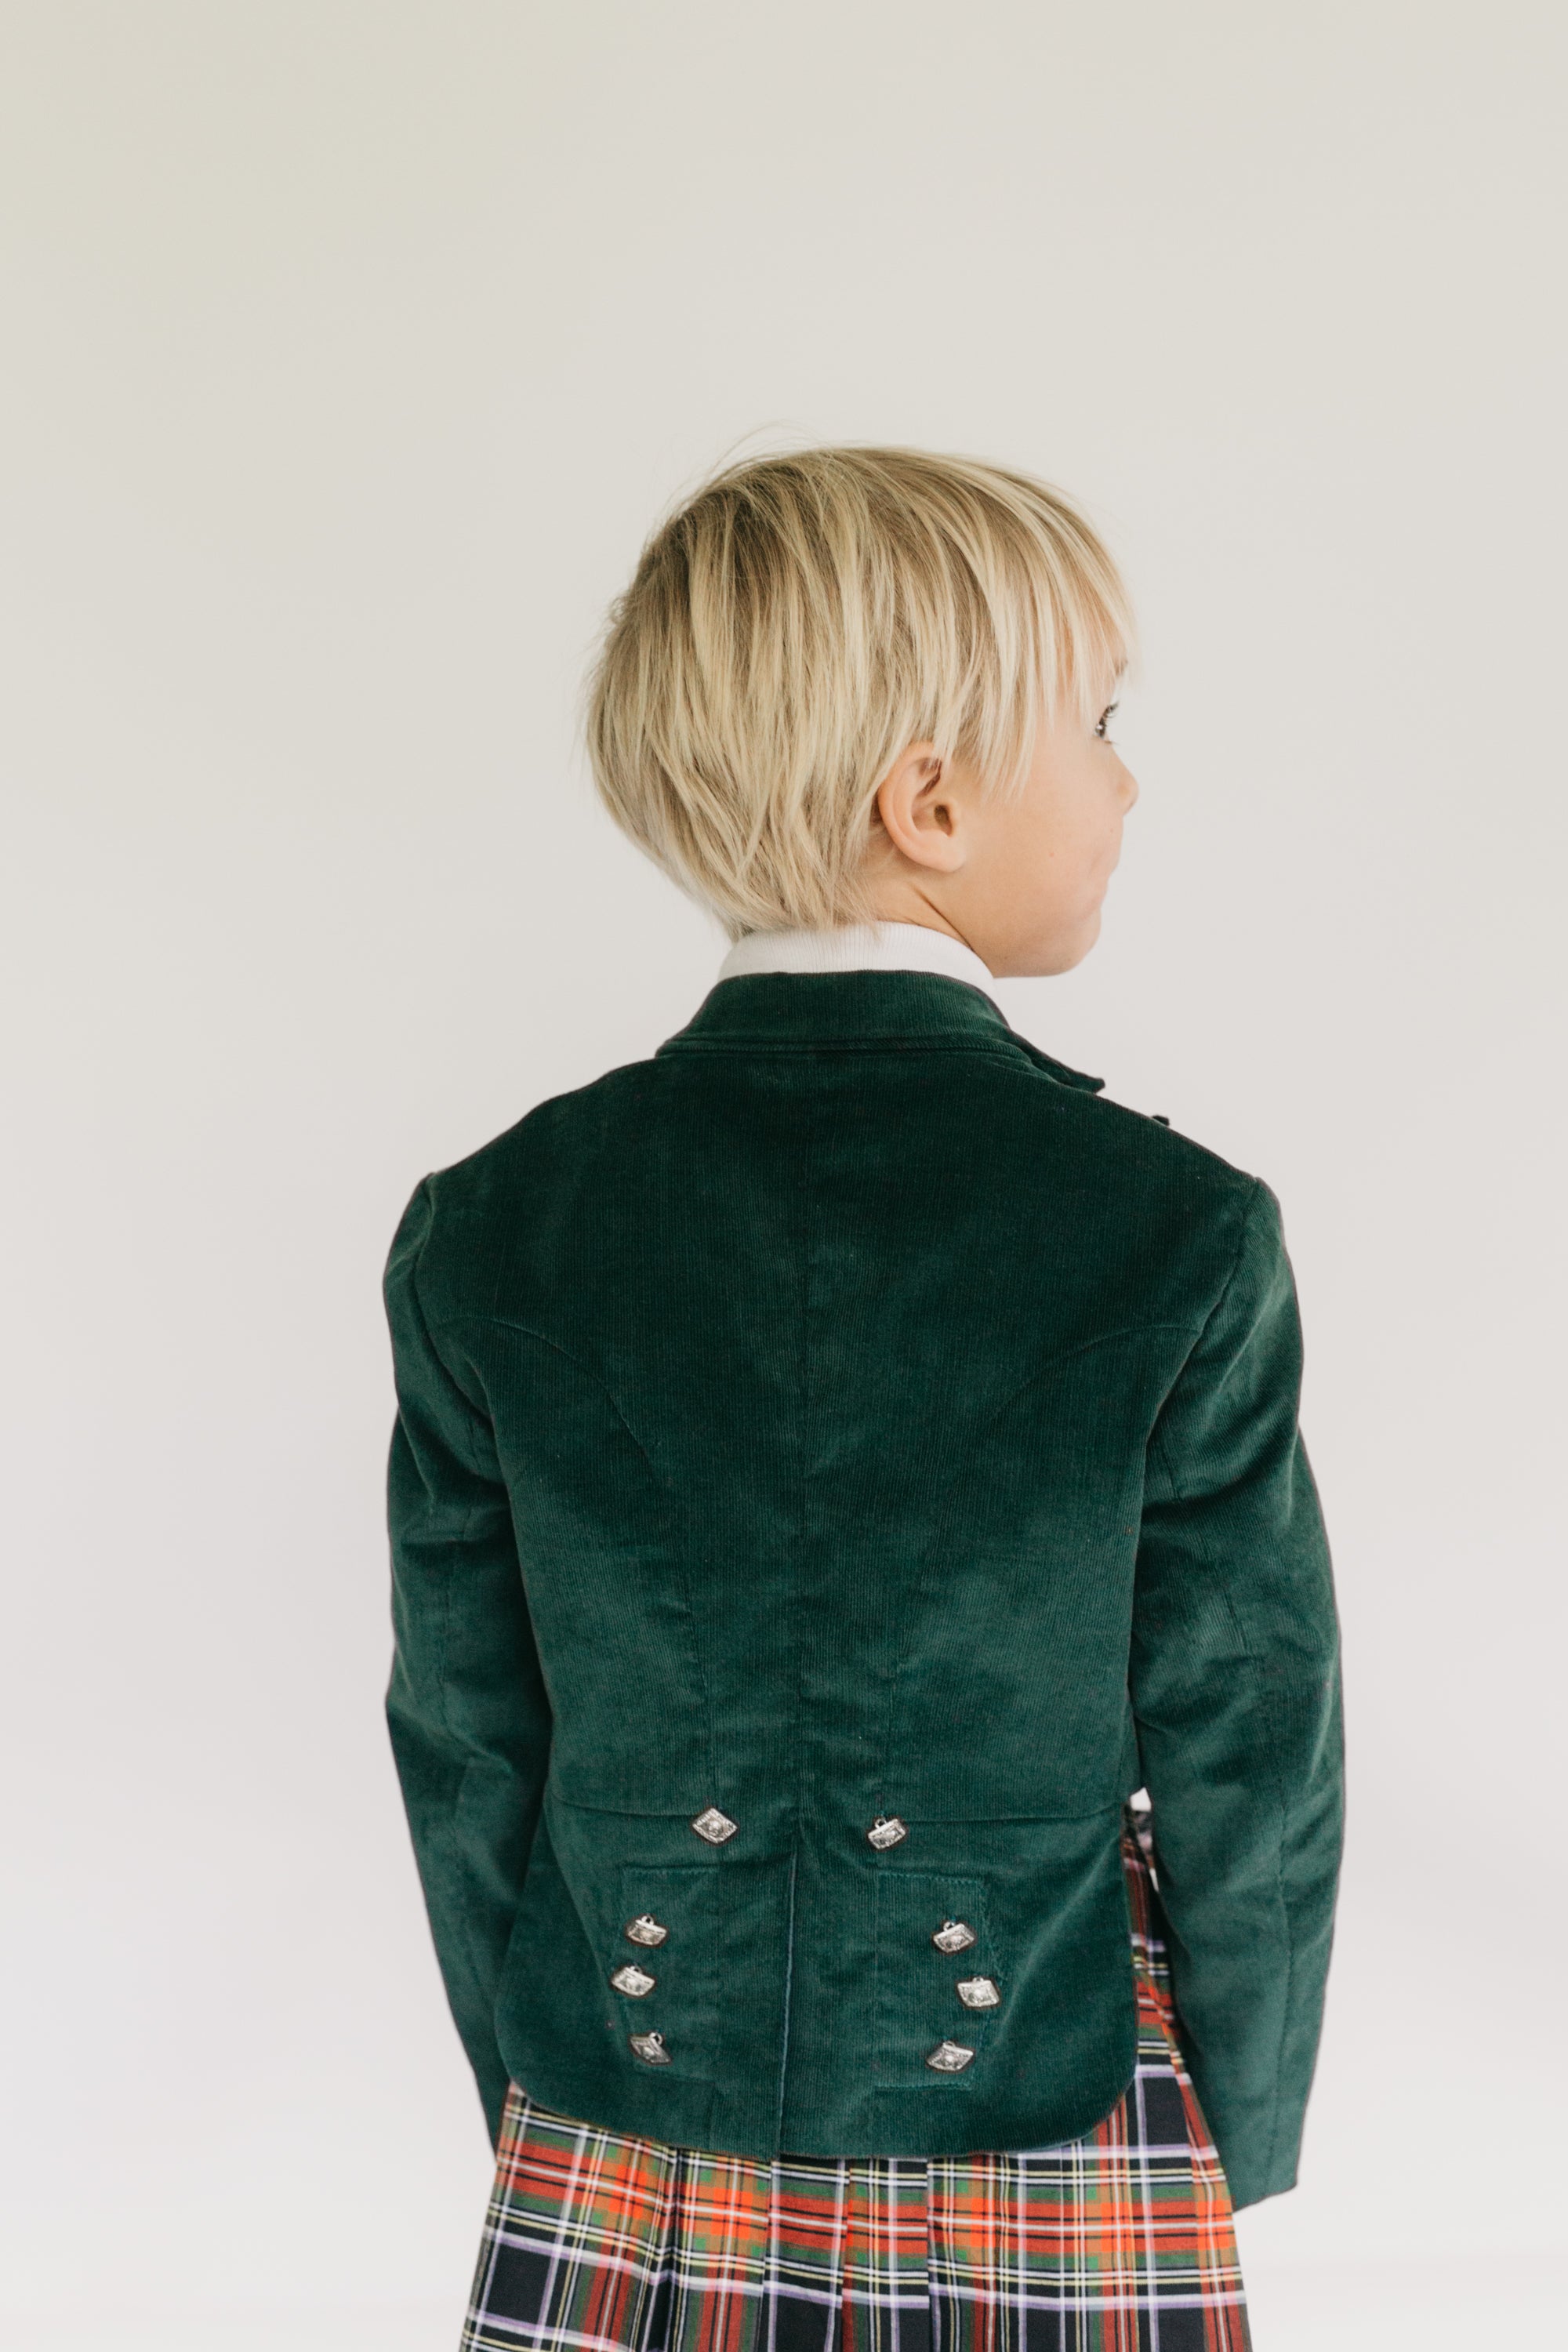 Close up photo of back of the Prince Charlie Jacket on young boy.